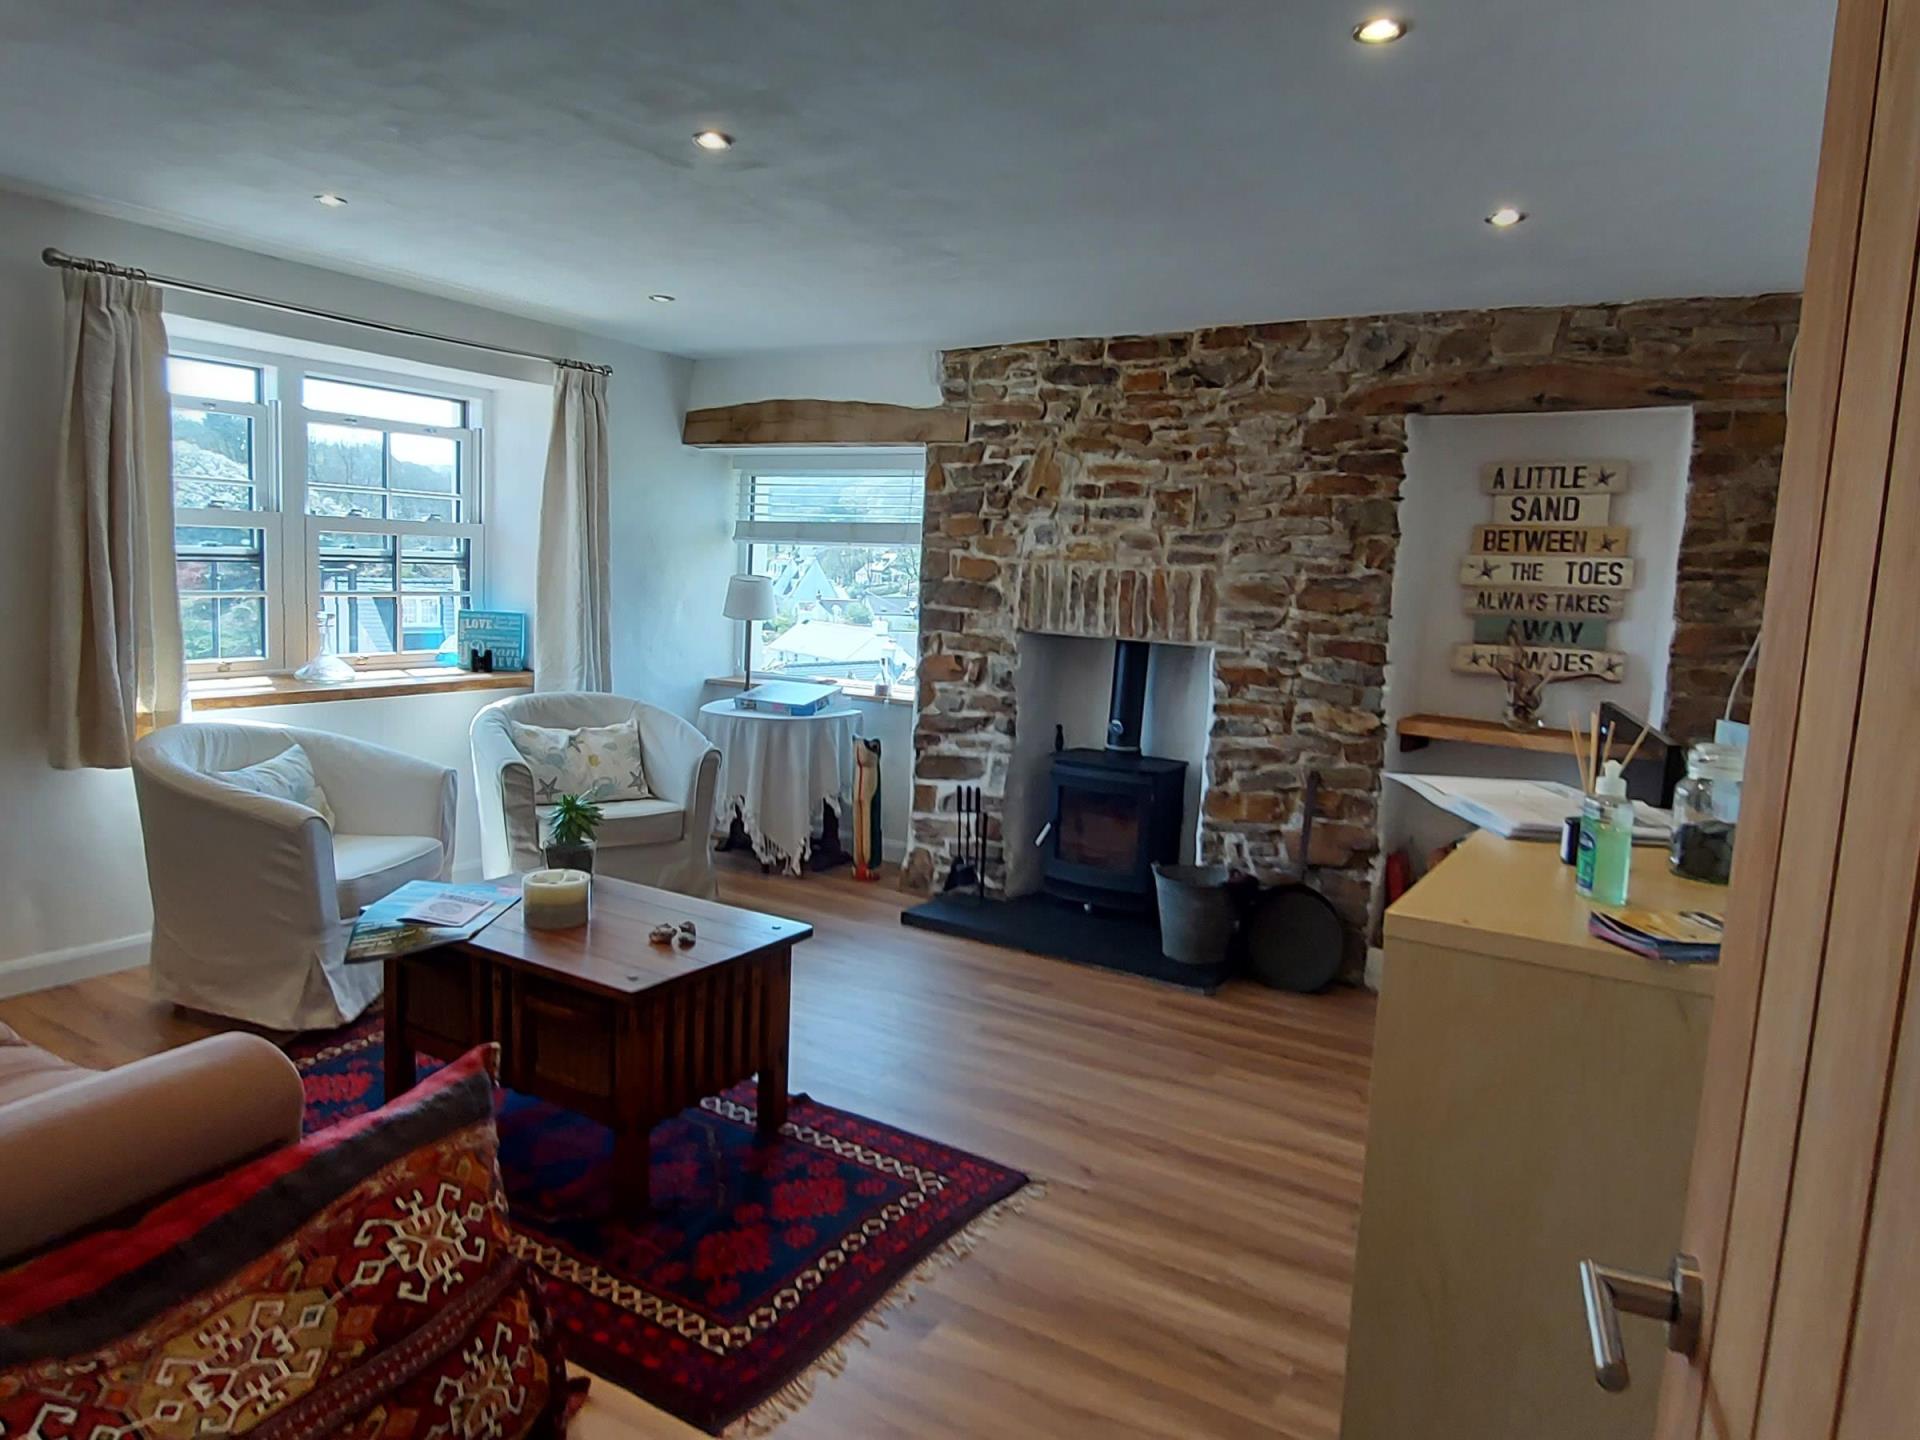 A home to home lounge with a wood burner.